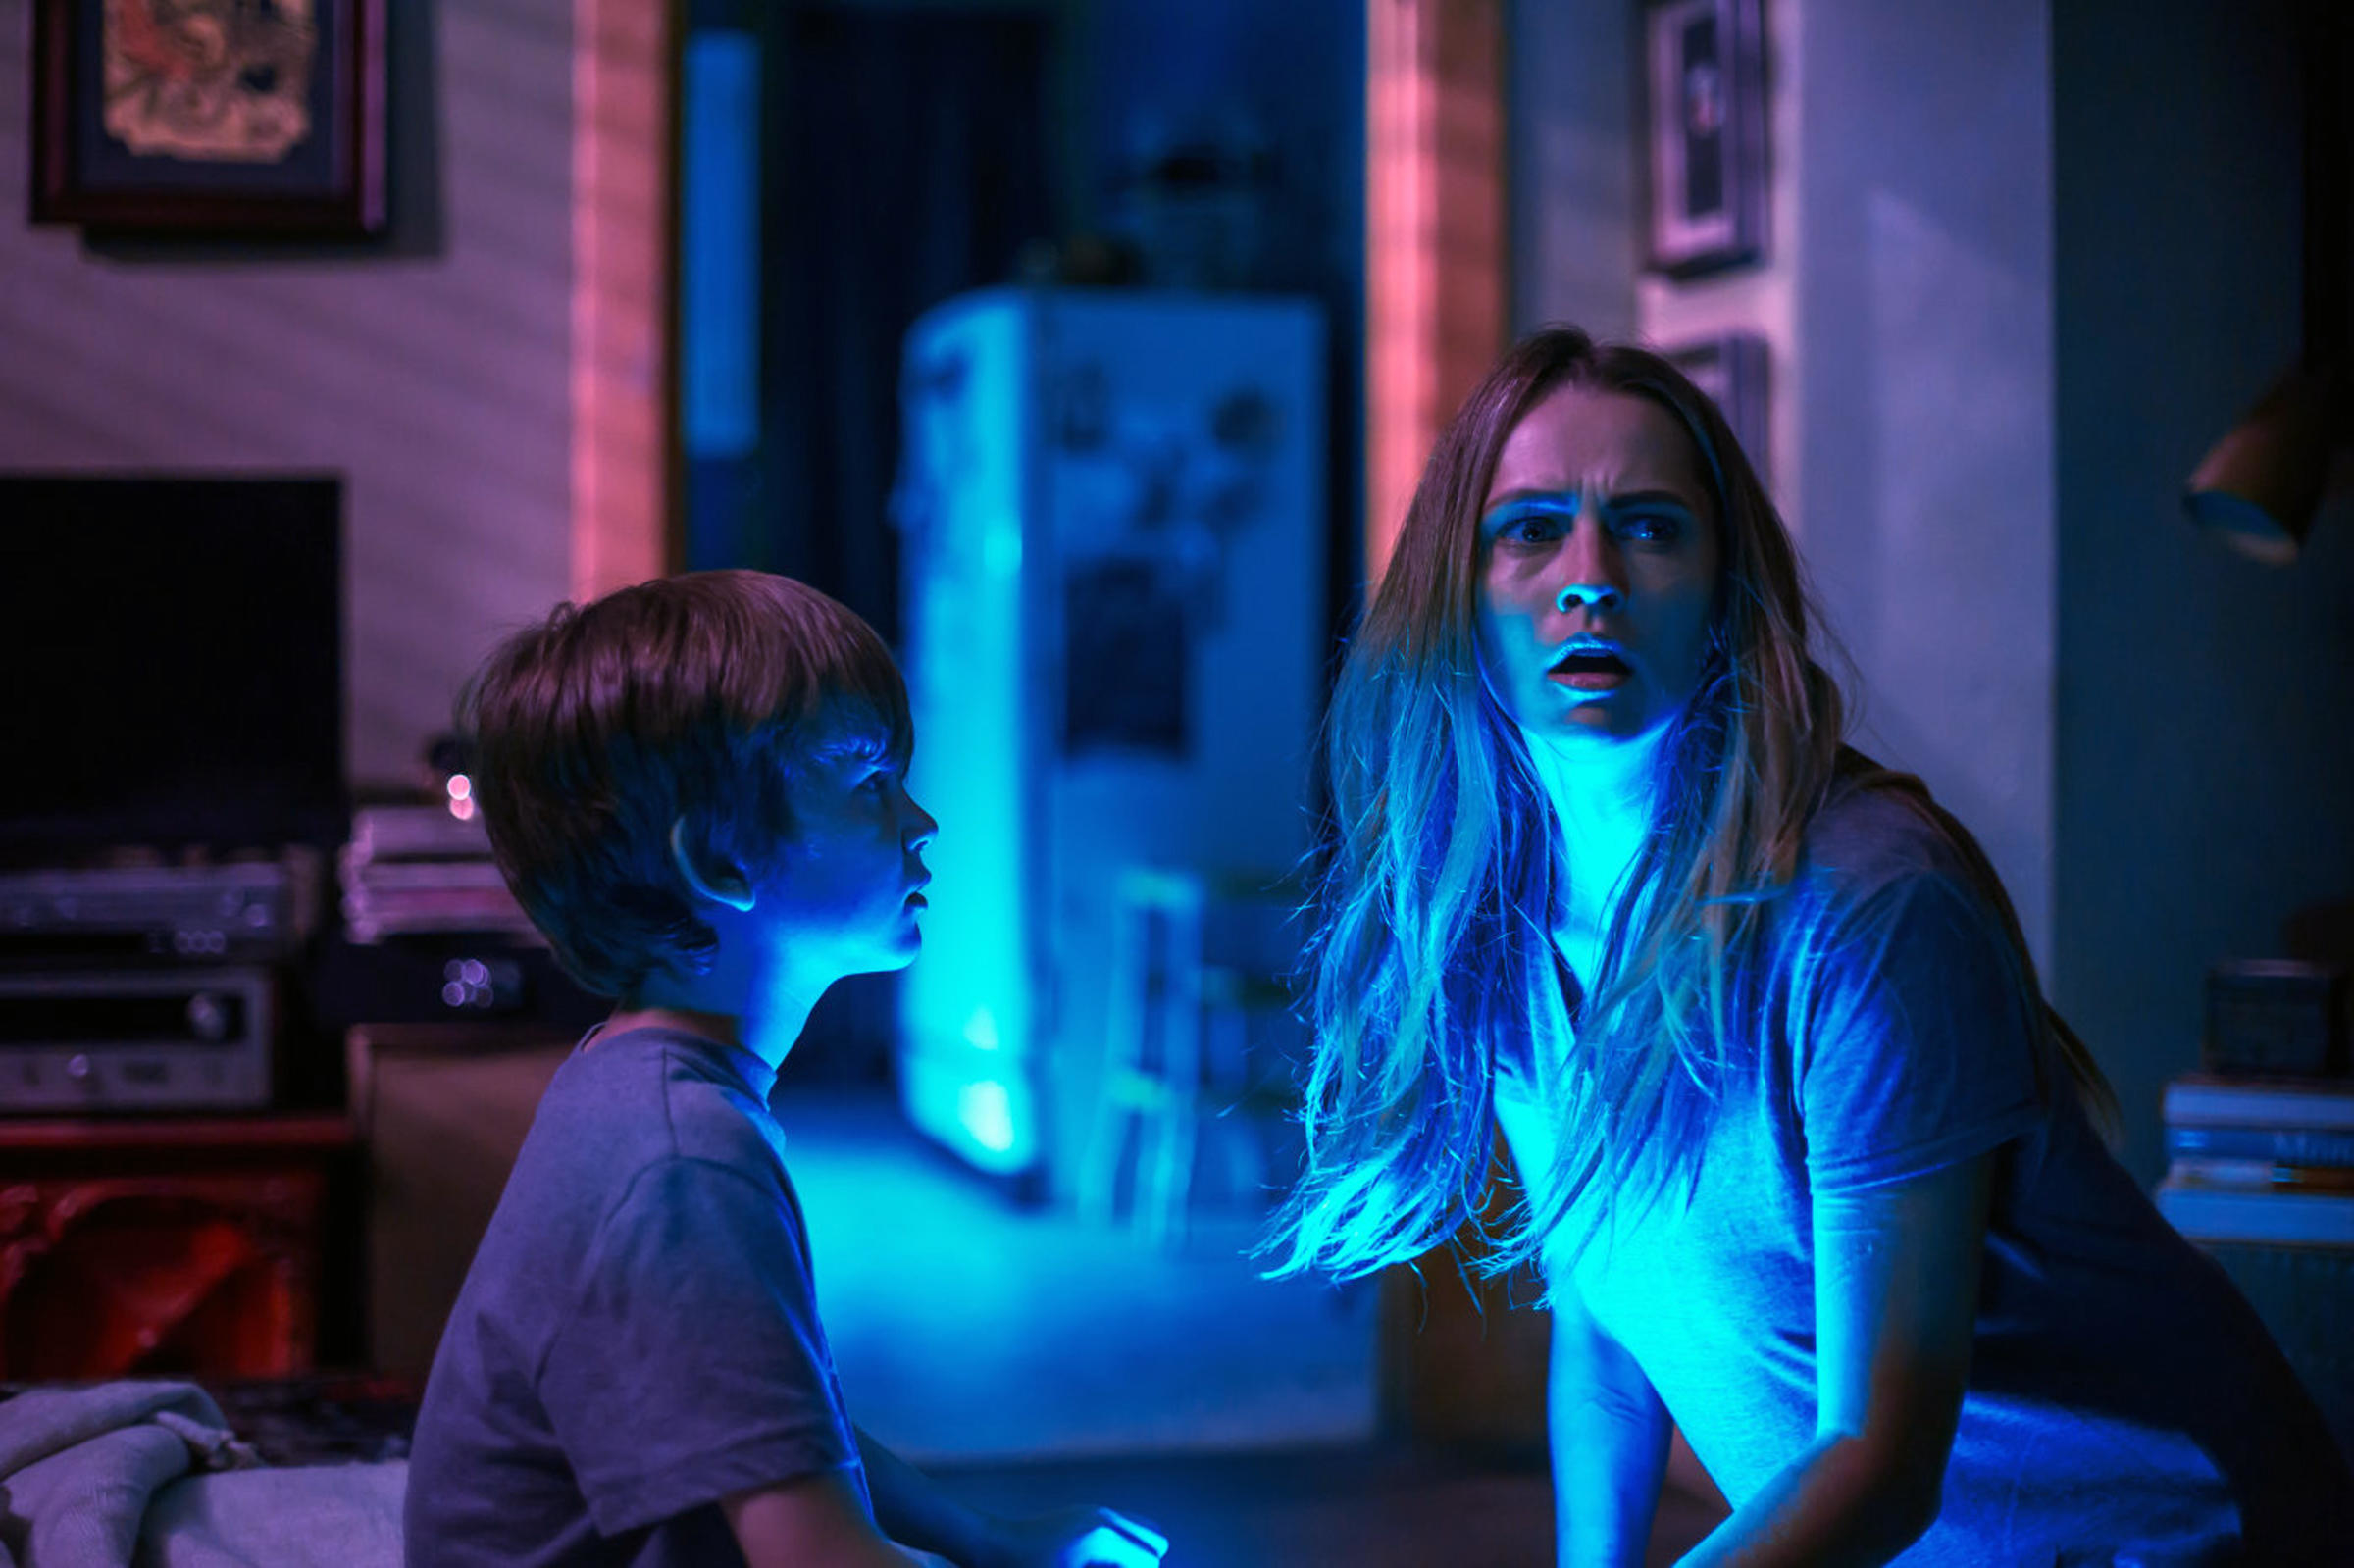 A young woman and a boy sit with great fear while basking in a bright blue light